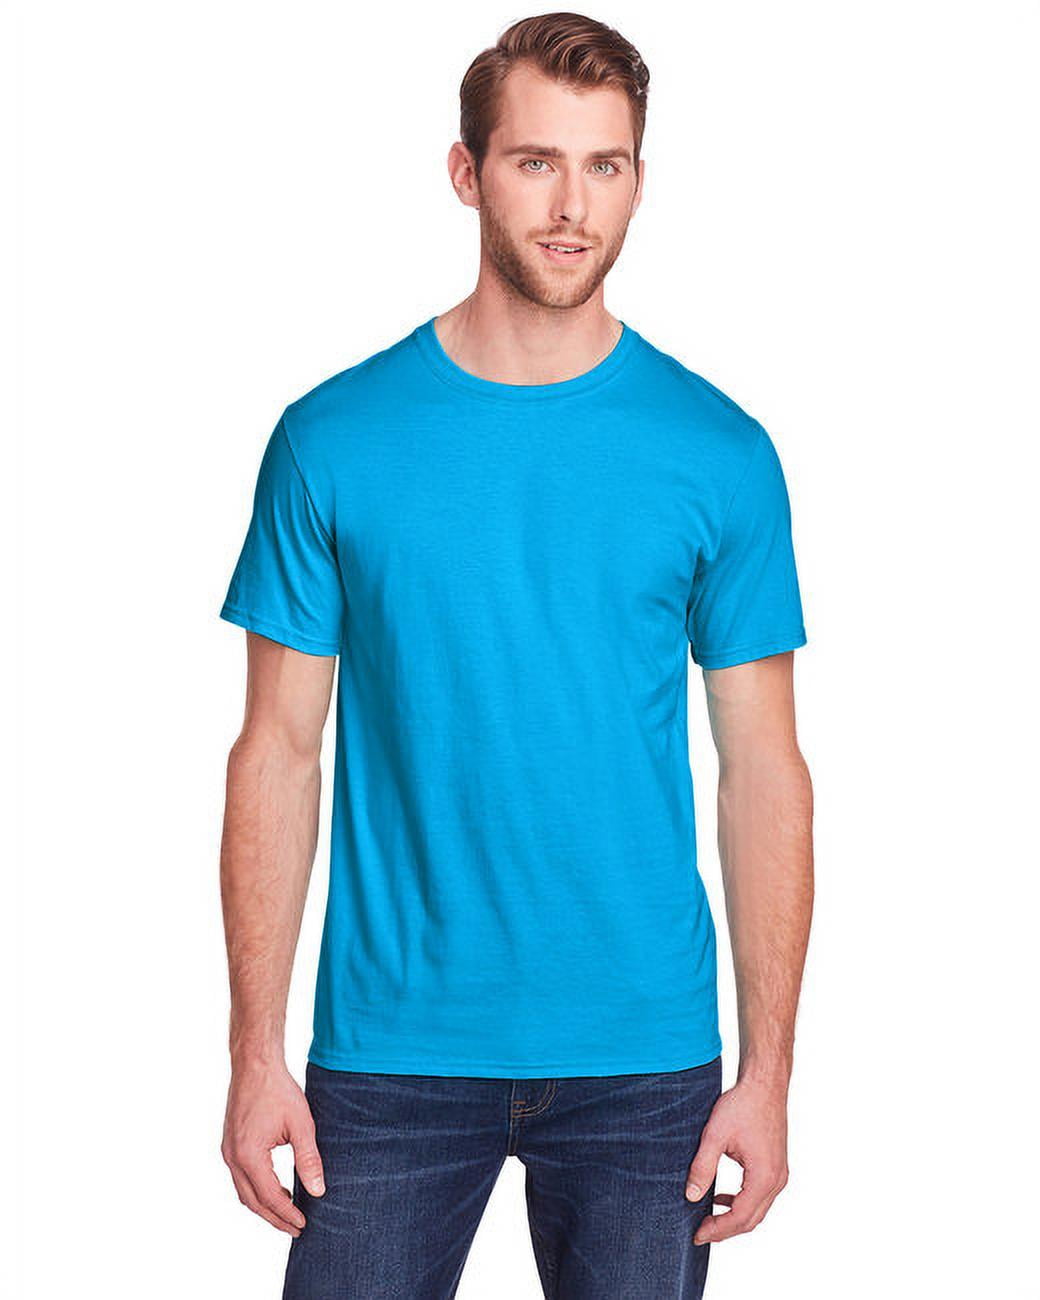 Fruit of the Loom - Unisex Iconic T-Shirt - IC47MR - Pacific Blue ...